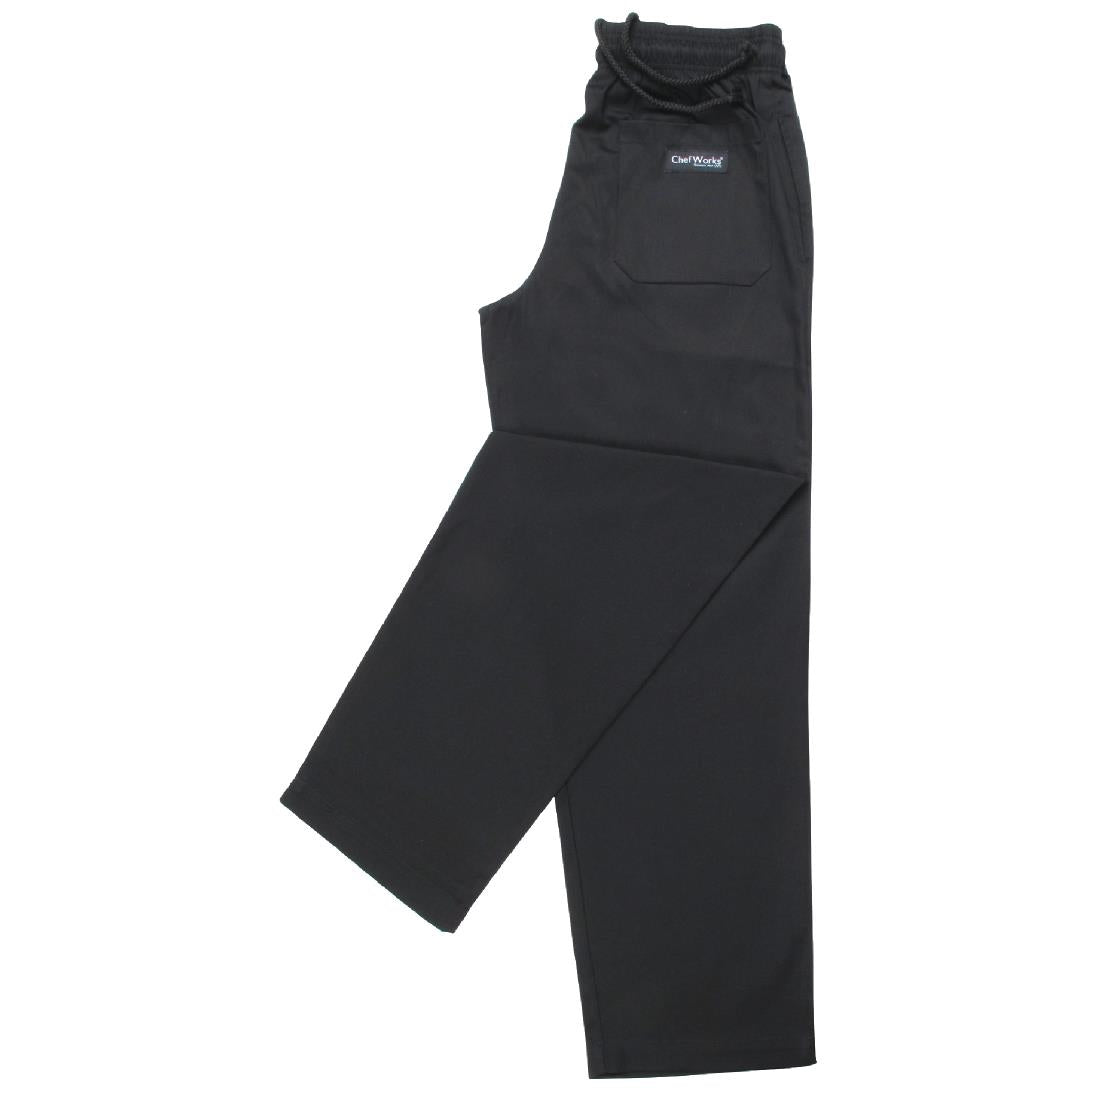 Chef Works Essential Baggy Pants Black JD Catering Equipment Solutions Ltd